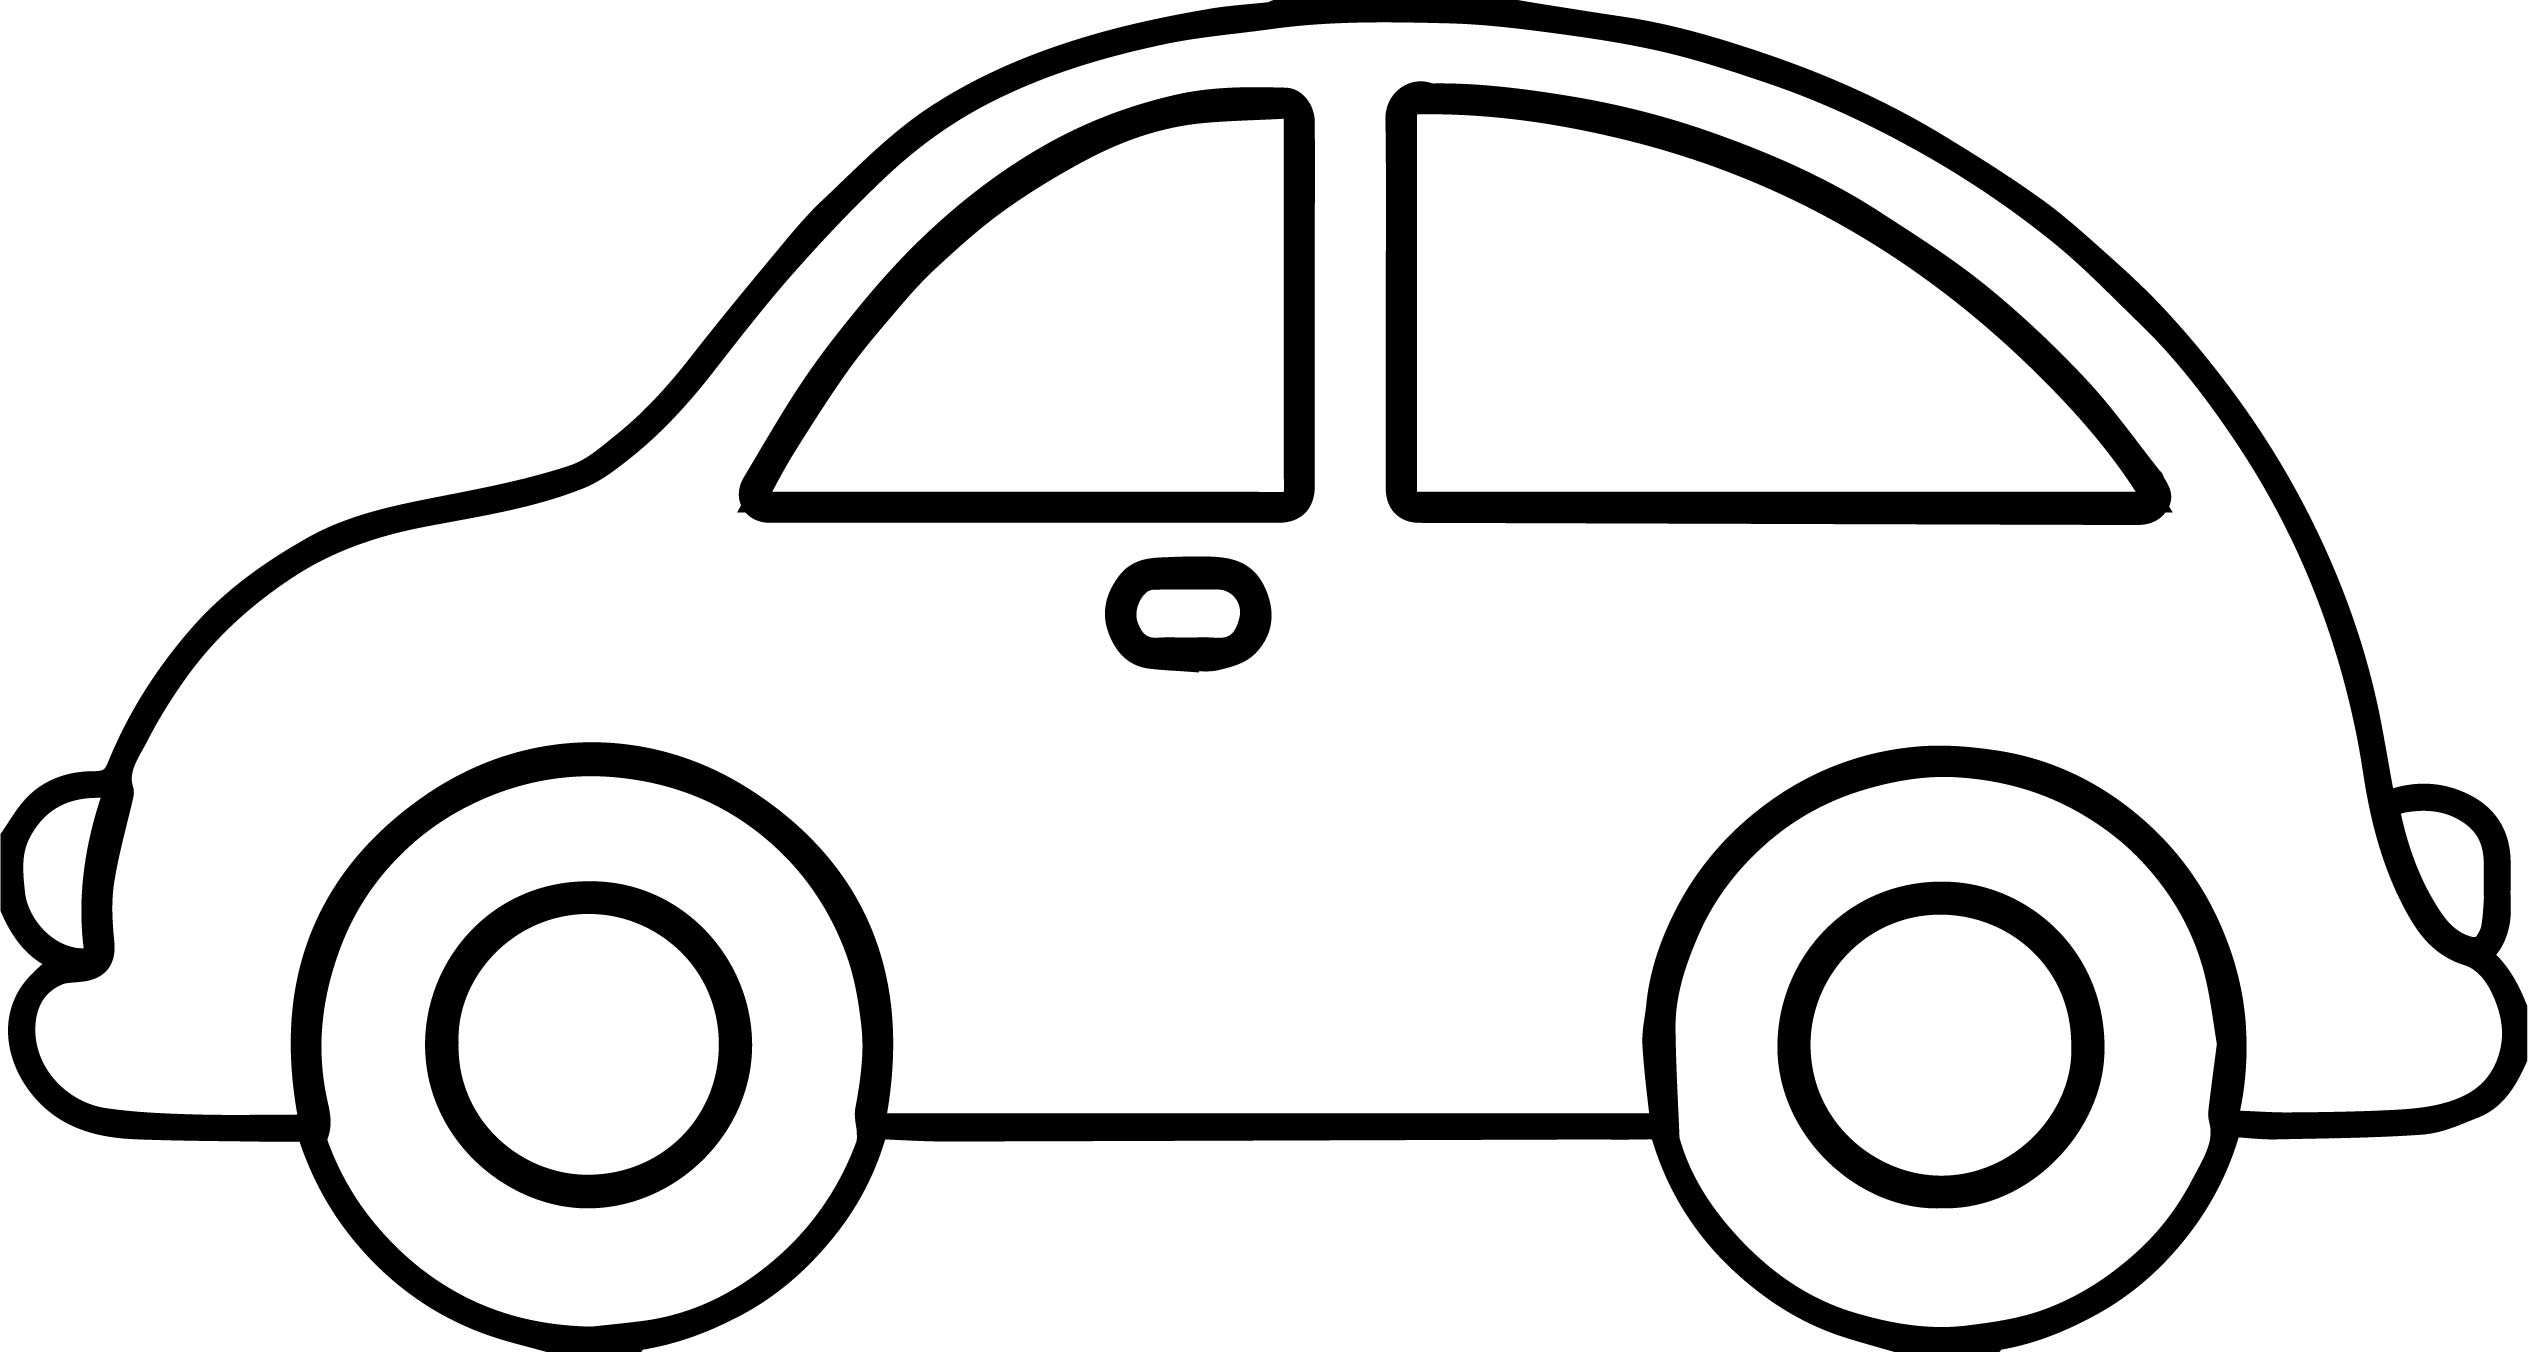 Toy Car Drawing at GetDrawings.com | Free for personal use Toy Car ...